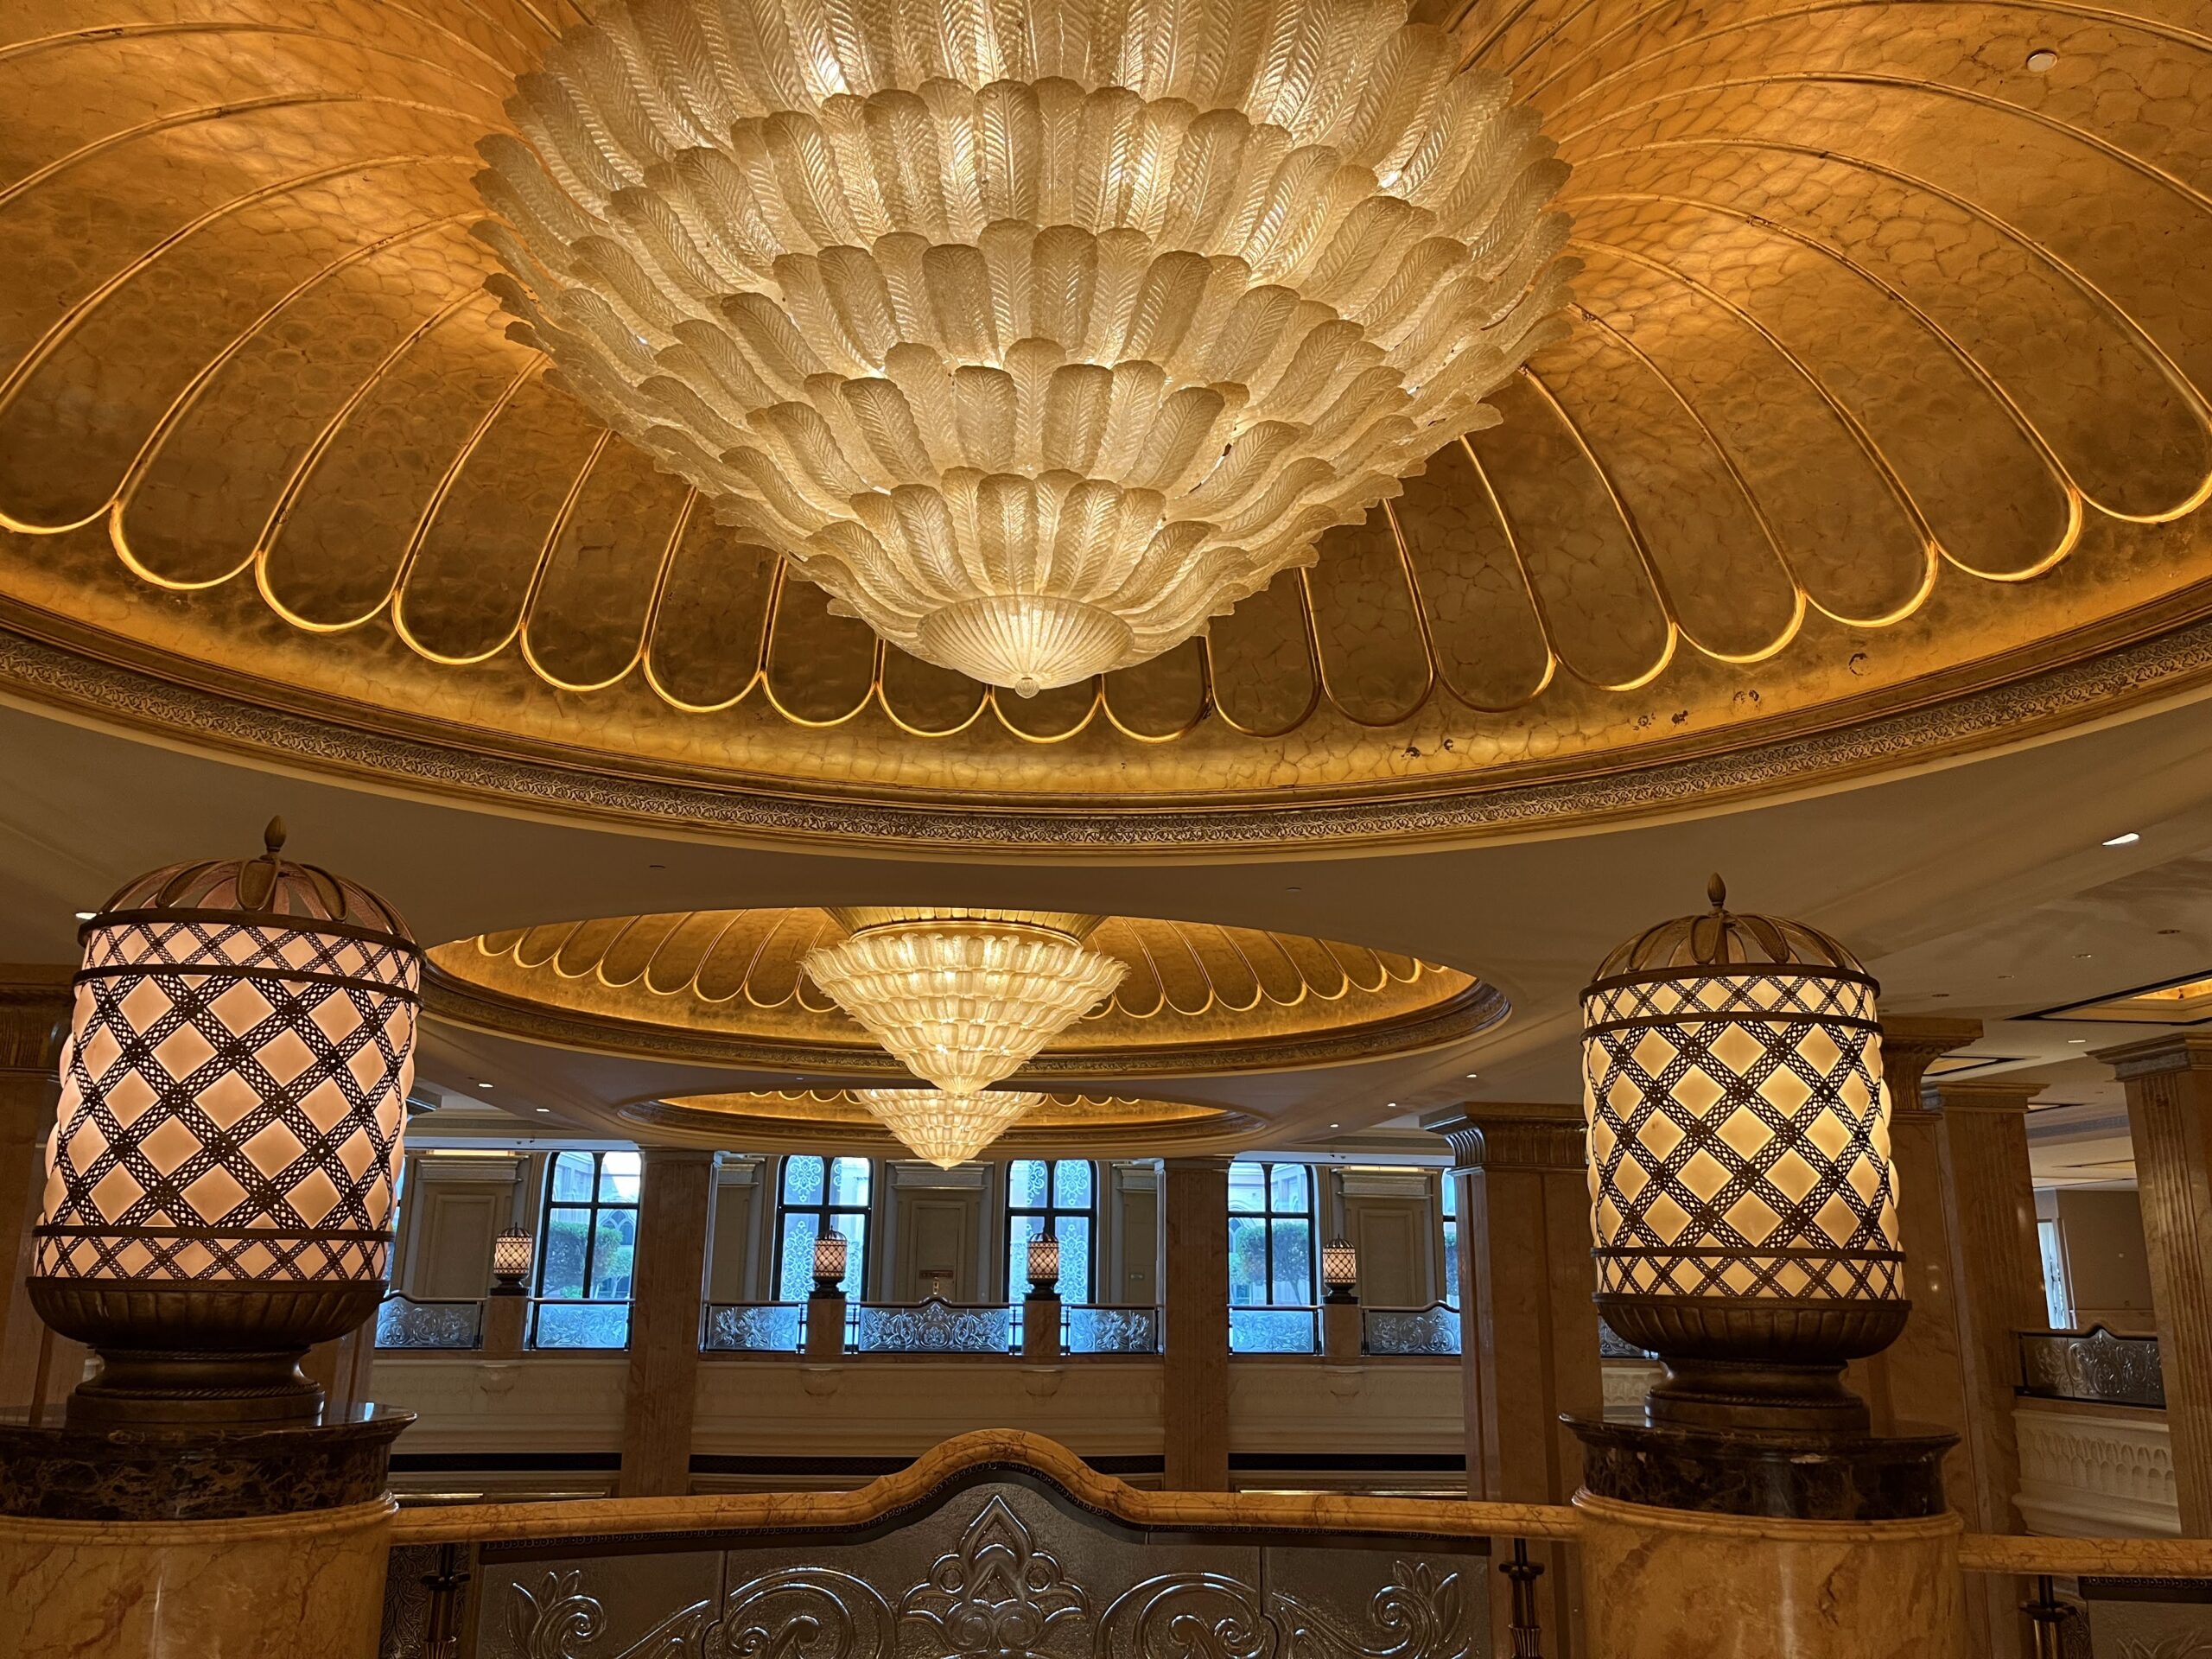 Beautiful Golden decor and interiors at the Emirates Palace Hotel